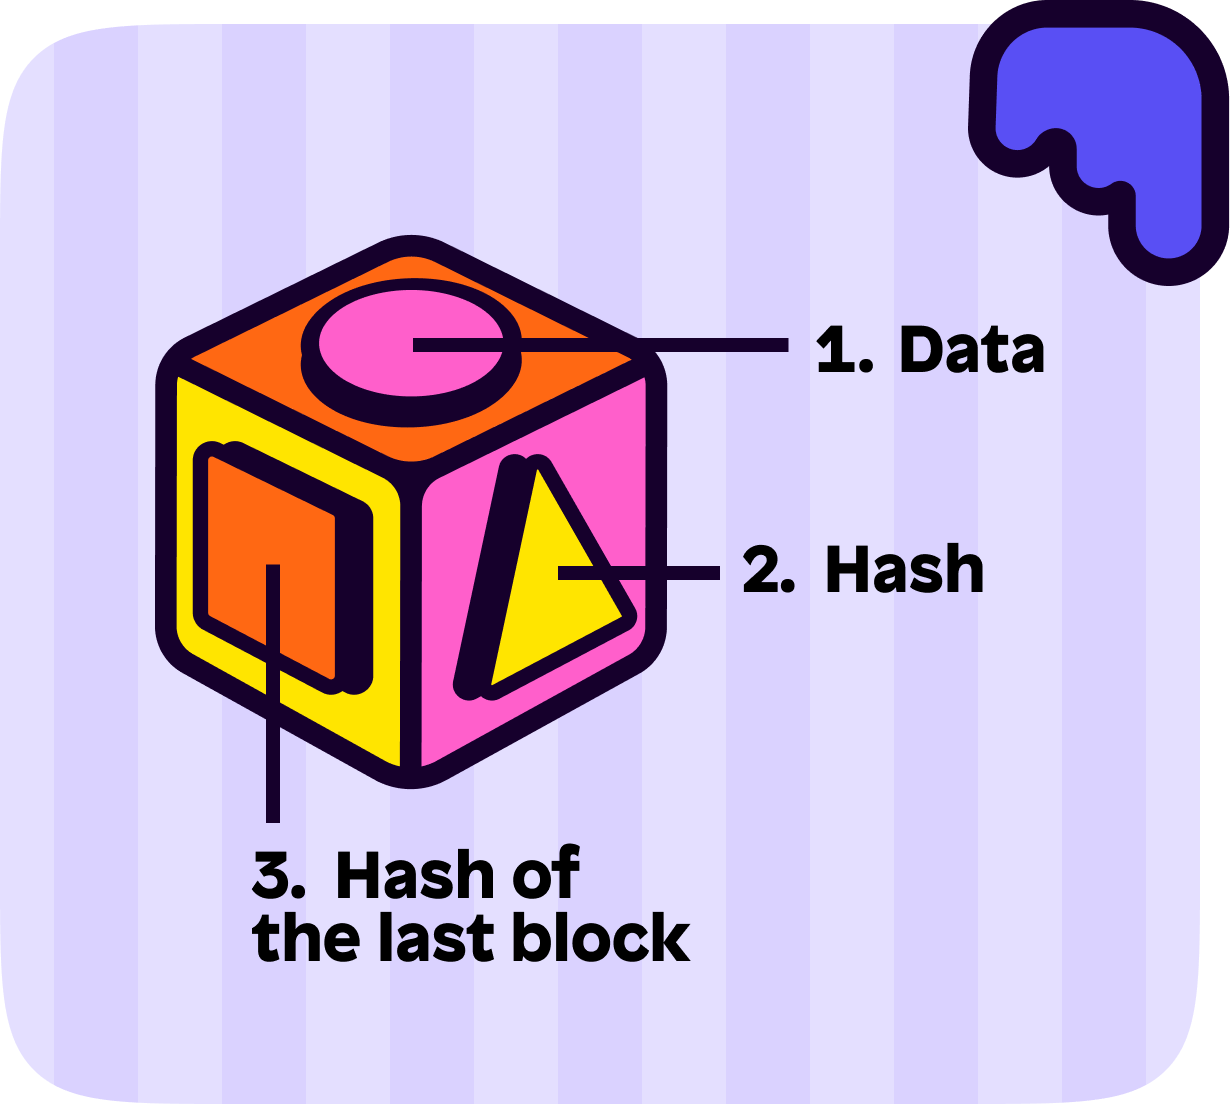 Three aspects to the blockchain explained - data, hash and hash of the previous block.